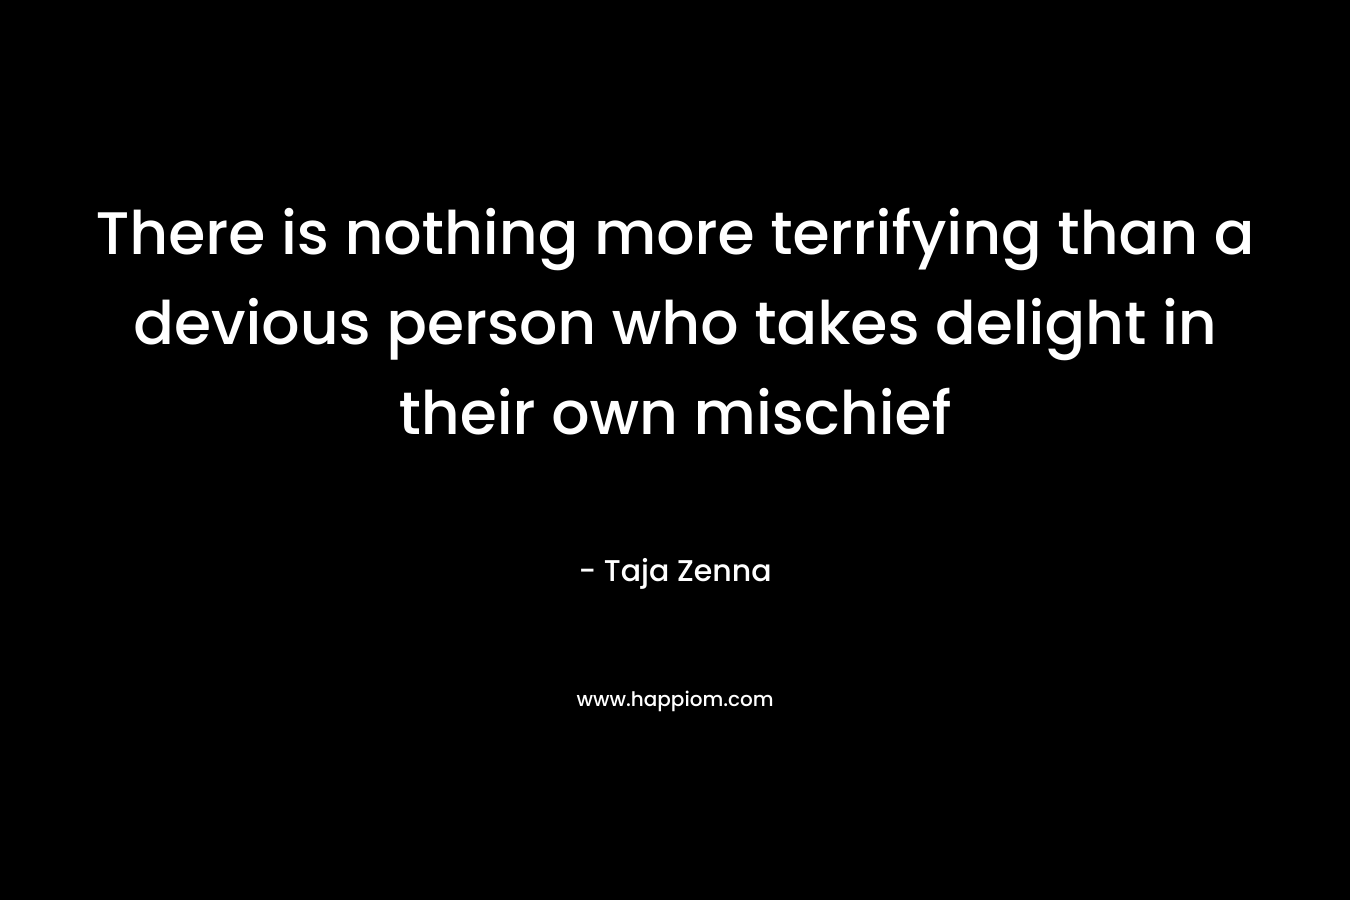 There is nothing more terrifying than a devious person who takes delight in their own mischief – Taja Zenna